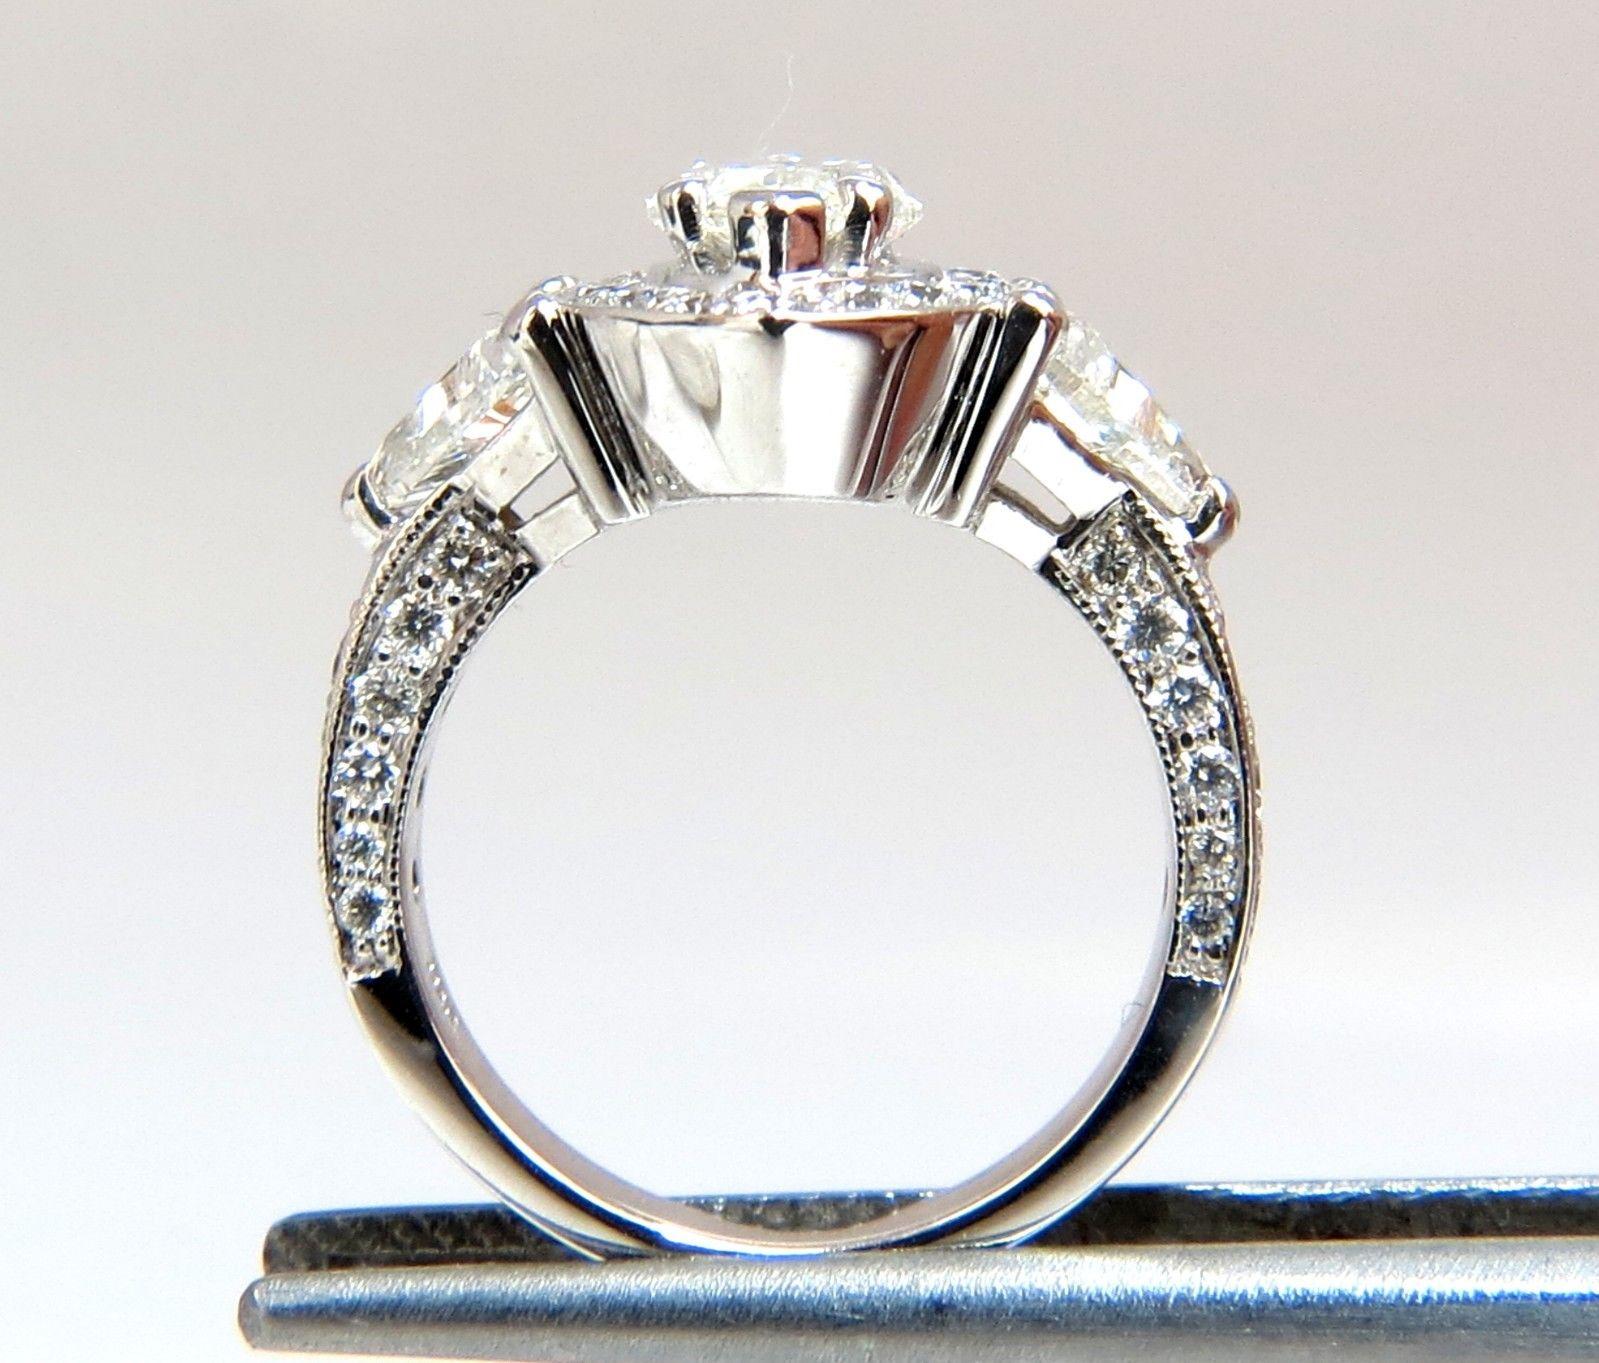 Marquise Mod Halo

1.01ct. Marquise diamond Ring

I-color, Si-1 clarity

9 x 5.5mm

.70ct (2) Side Trilliant cut diamonds

I-color vs-2 clarity

& .80 round diamonds accents:

H-color Vs-2 clarity

14kt. white gold. 

5.1 grams.

Ring is 14.5mm